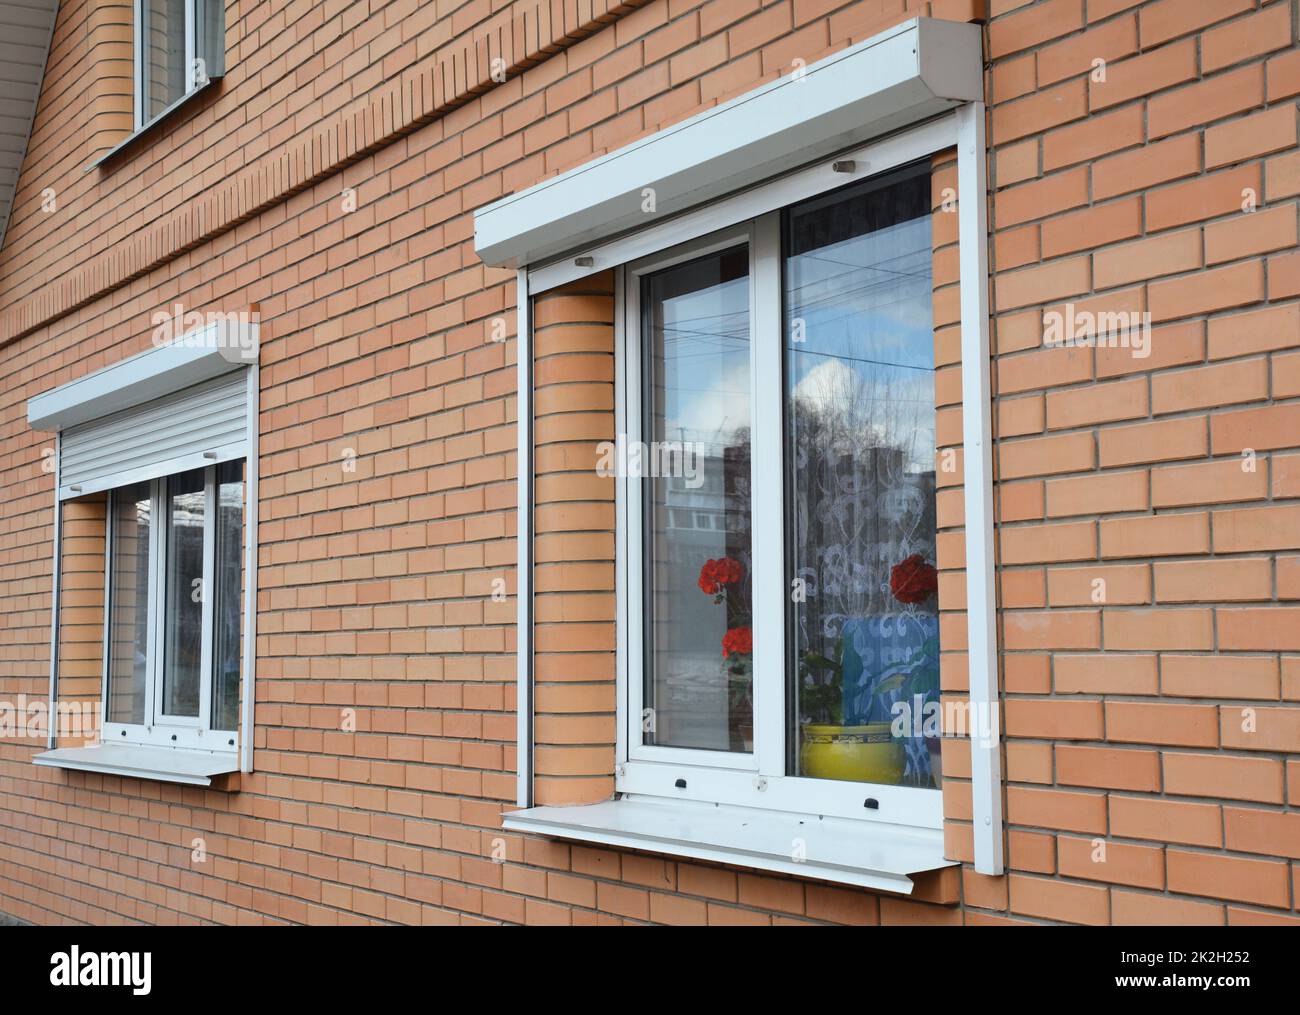 Rolling shutters house windows protection. Brick house with metal roller shutters on the windows Stock Photo